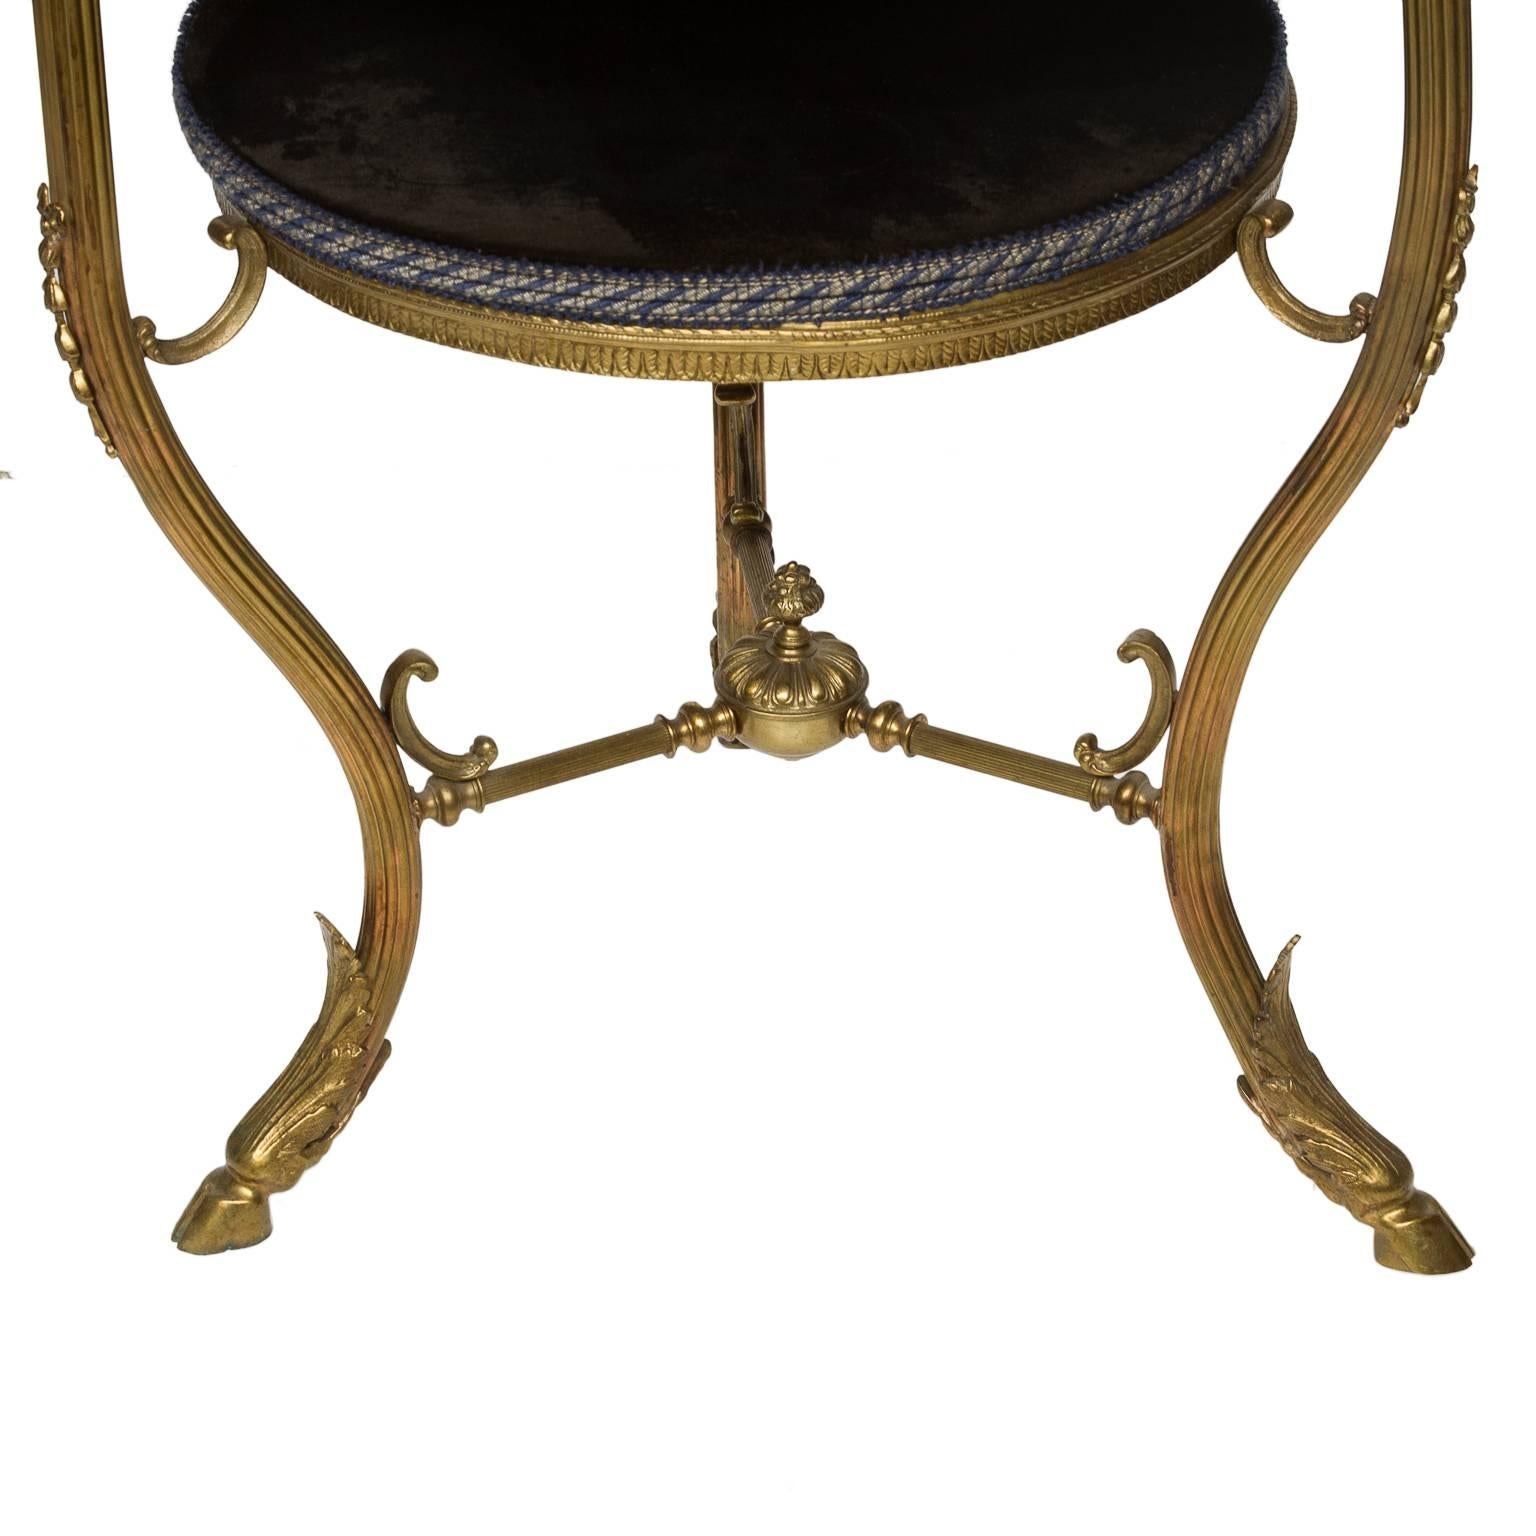 These Italian two-tiered side tables have four fitted navy Italian velvet platforms. The elegant reeded curved legs end with capped acanthus leaf and hoofed feet. The finely reeded stretcher is centered with a finial. The sides tables are enhanced